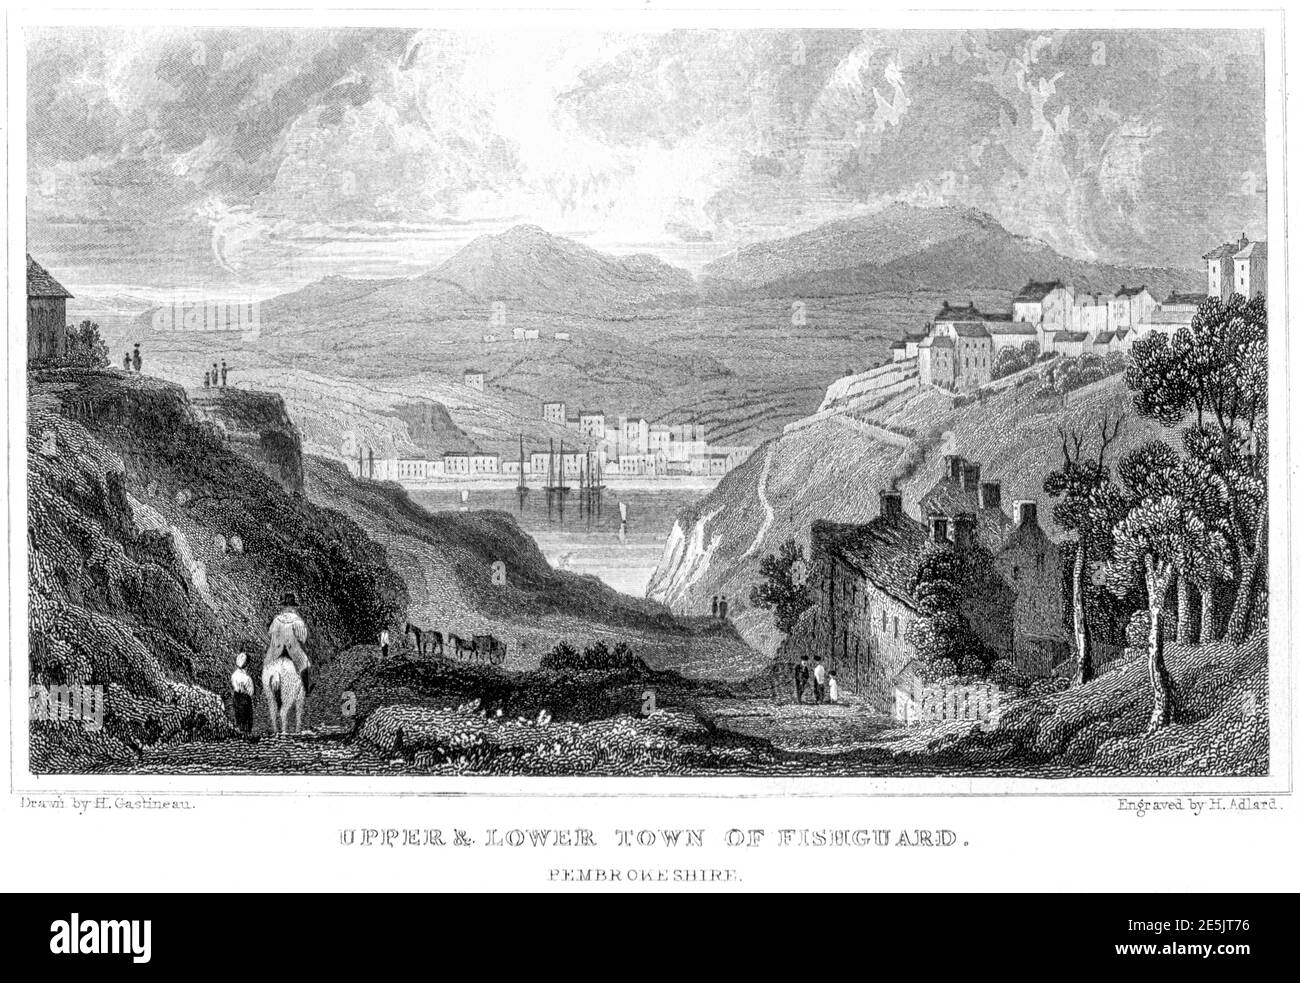 An engraving of Upper & Lower Town of Fishguard, Pembrokeshire scanned at high resolution from a book published in 1854. Believed copyright free. Stock Photo